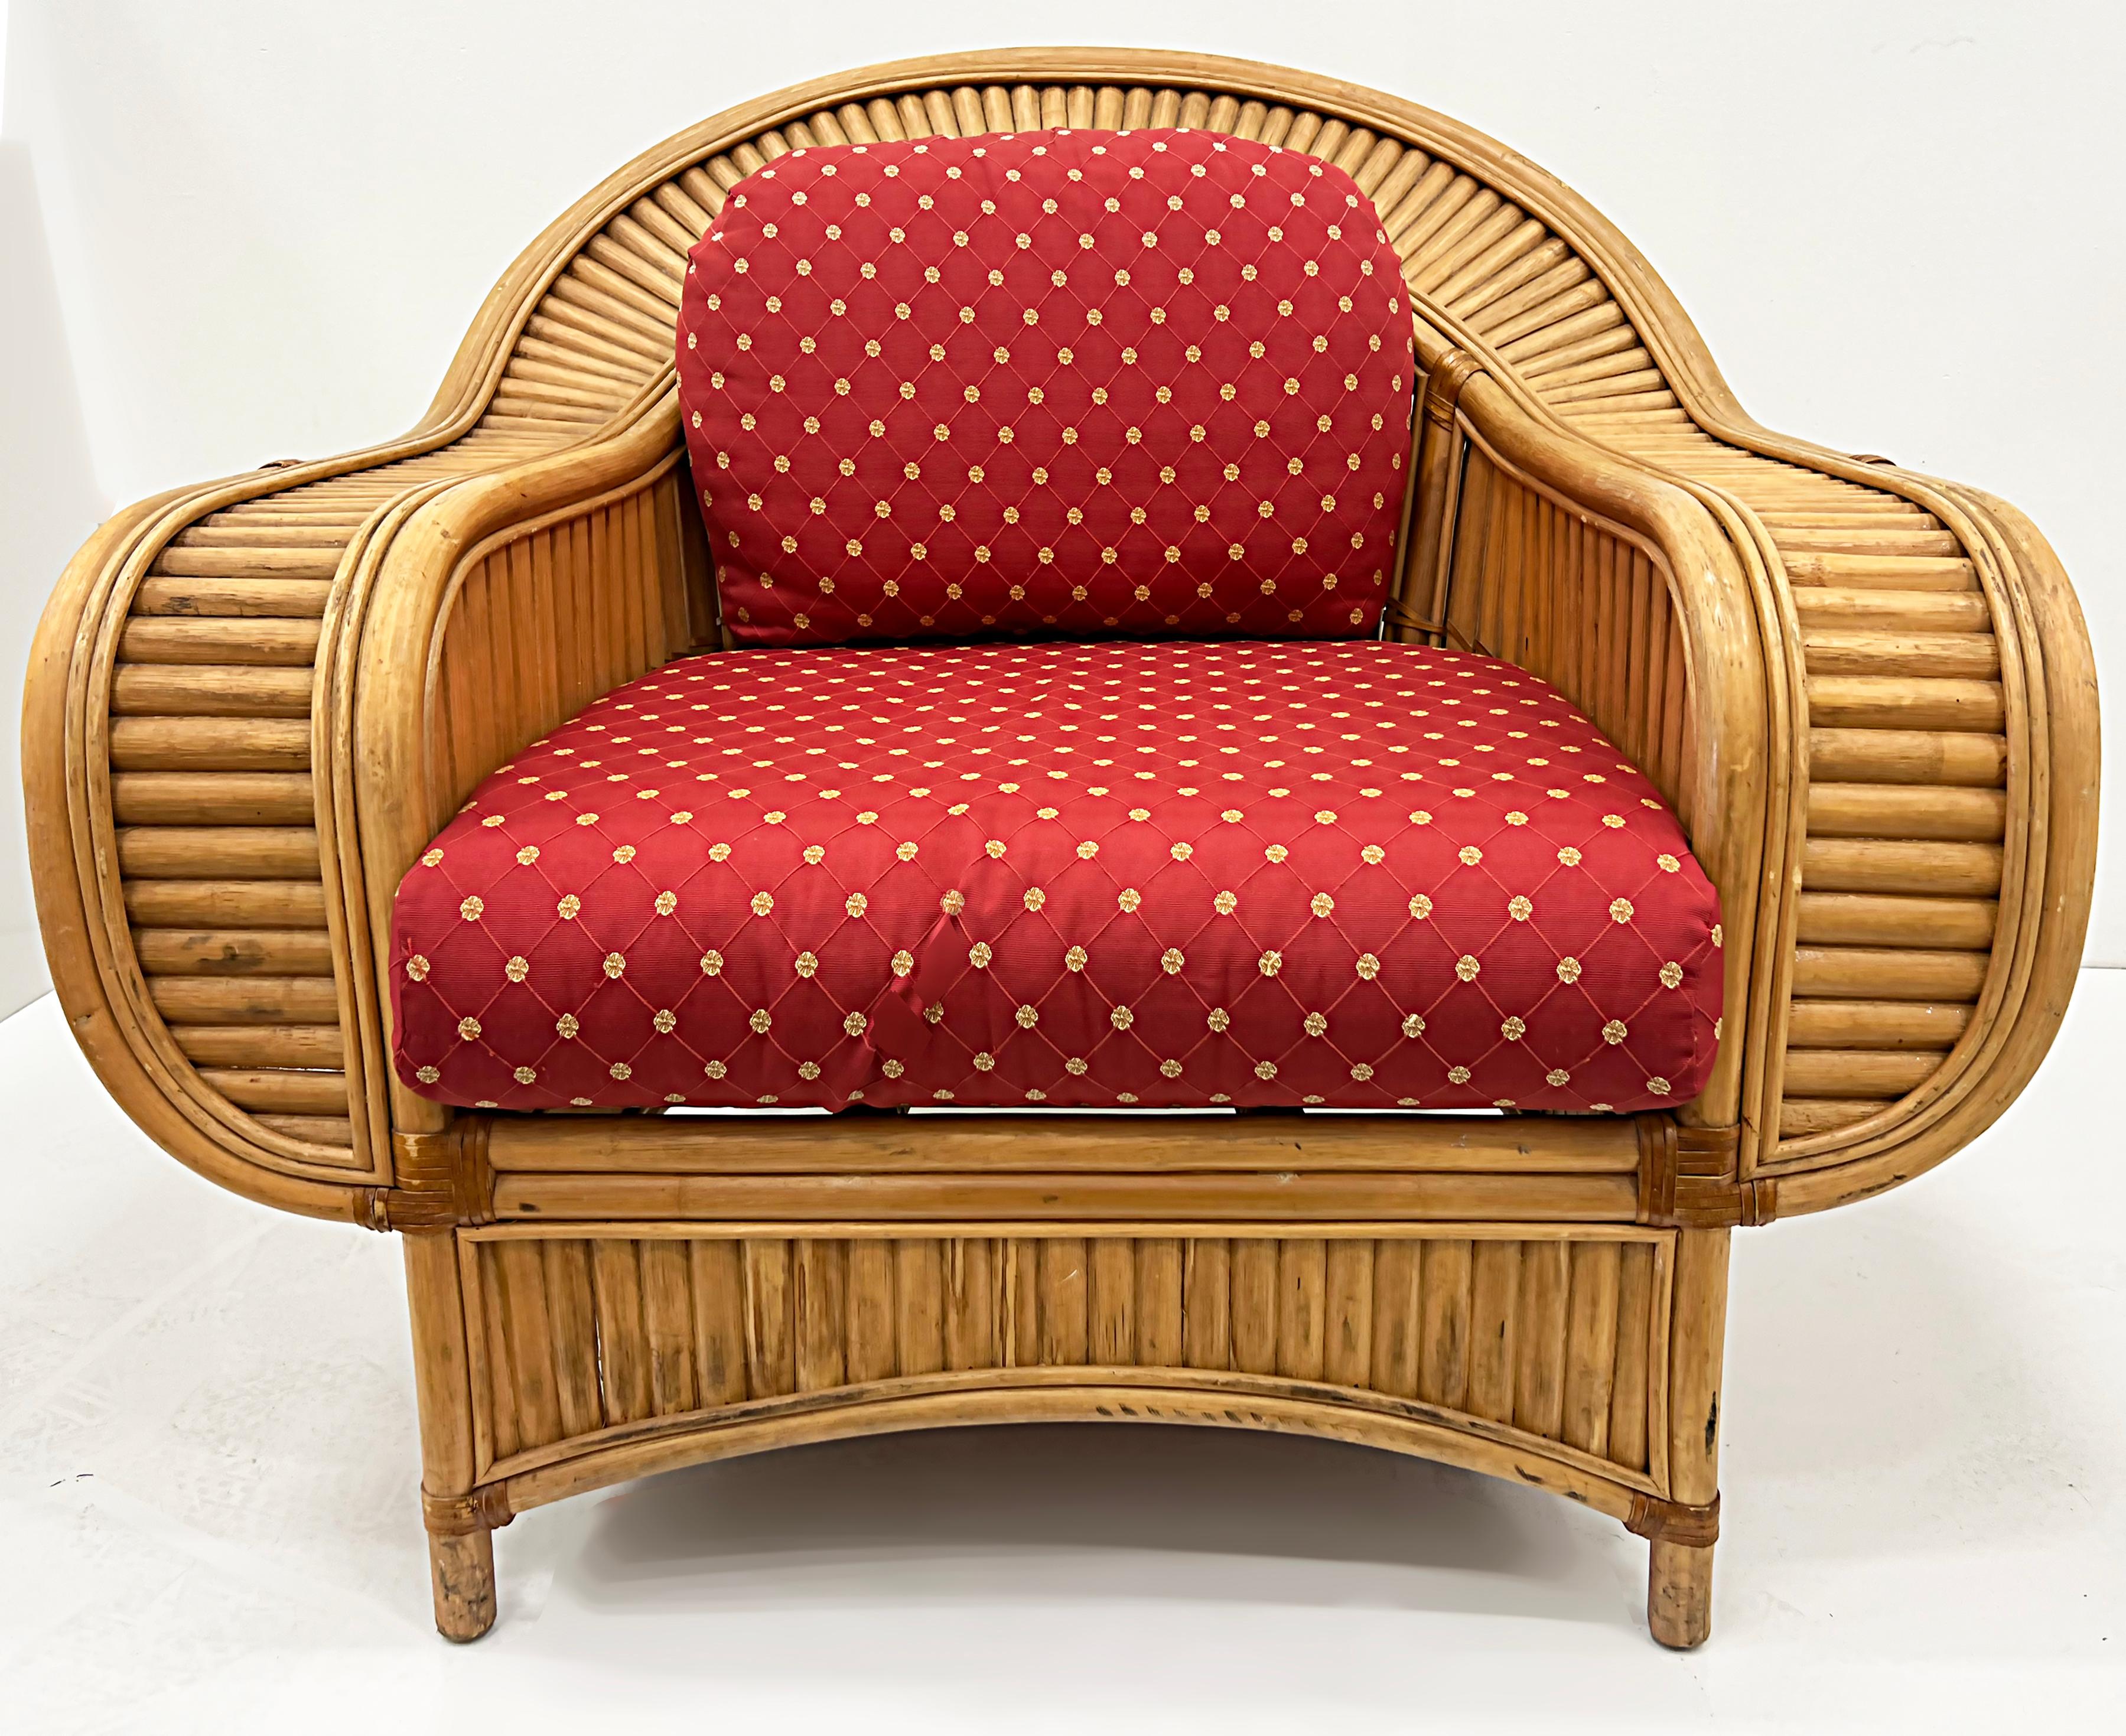 
Vintage Coastal Henry Olko Style Rattan Club Chairs with Leather

Offered for sale is a sculptural pair of substantial 1970s rattan lounge chairs created in the style of Henry Olko. These chairs have removable cushions and are extremely